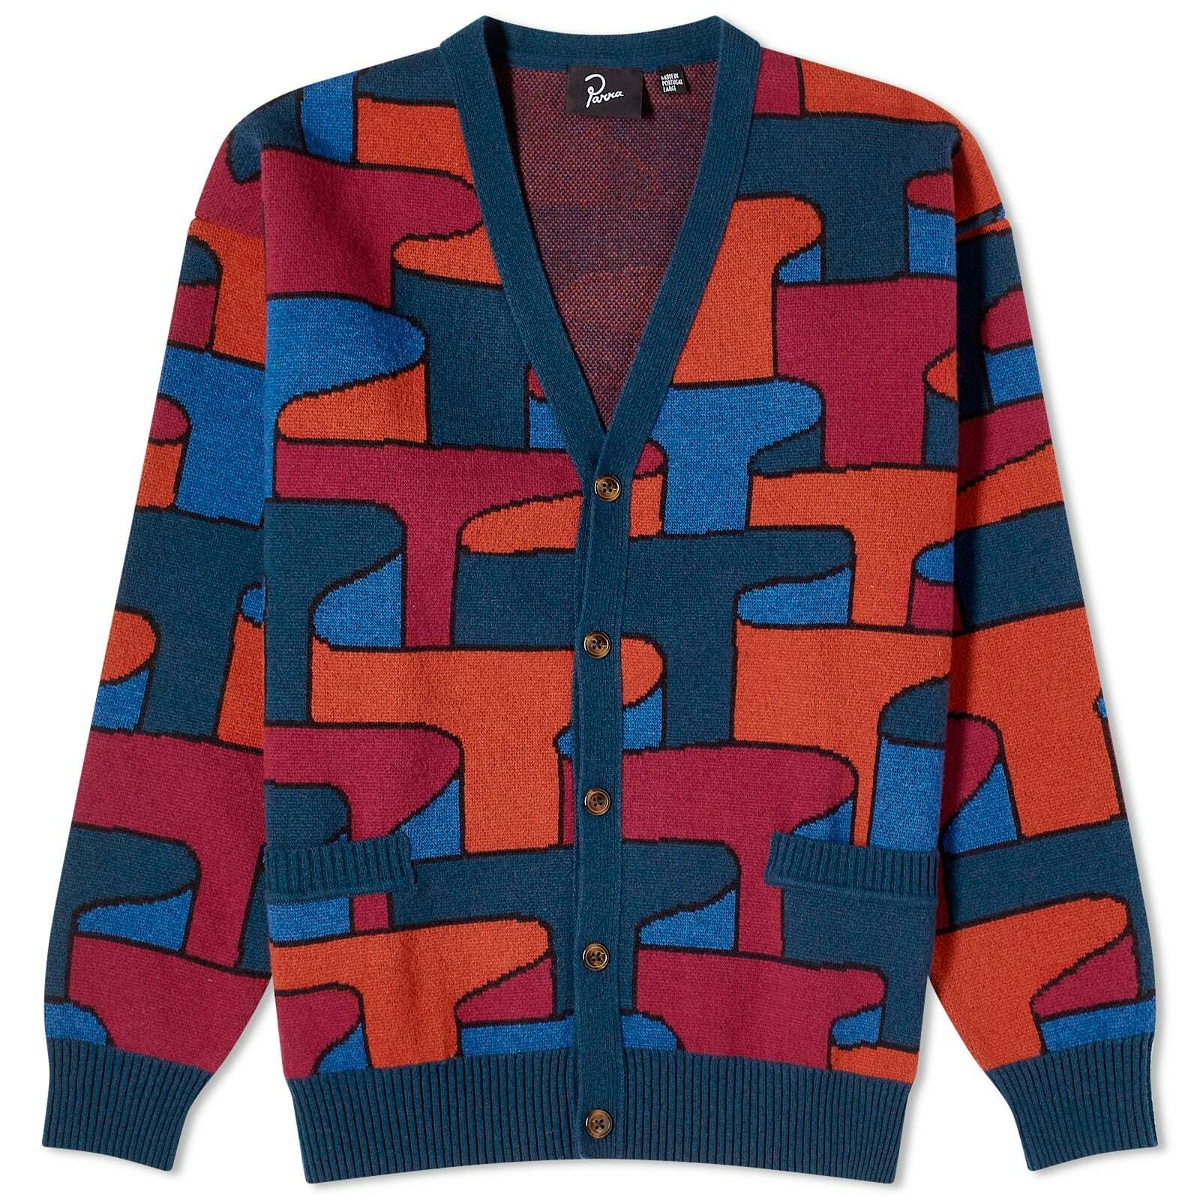 Photo: By Parra Men's Crayons All Over Knit Cardigan in Multi